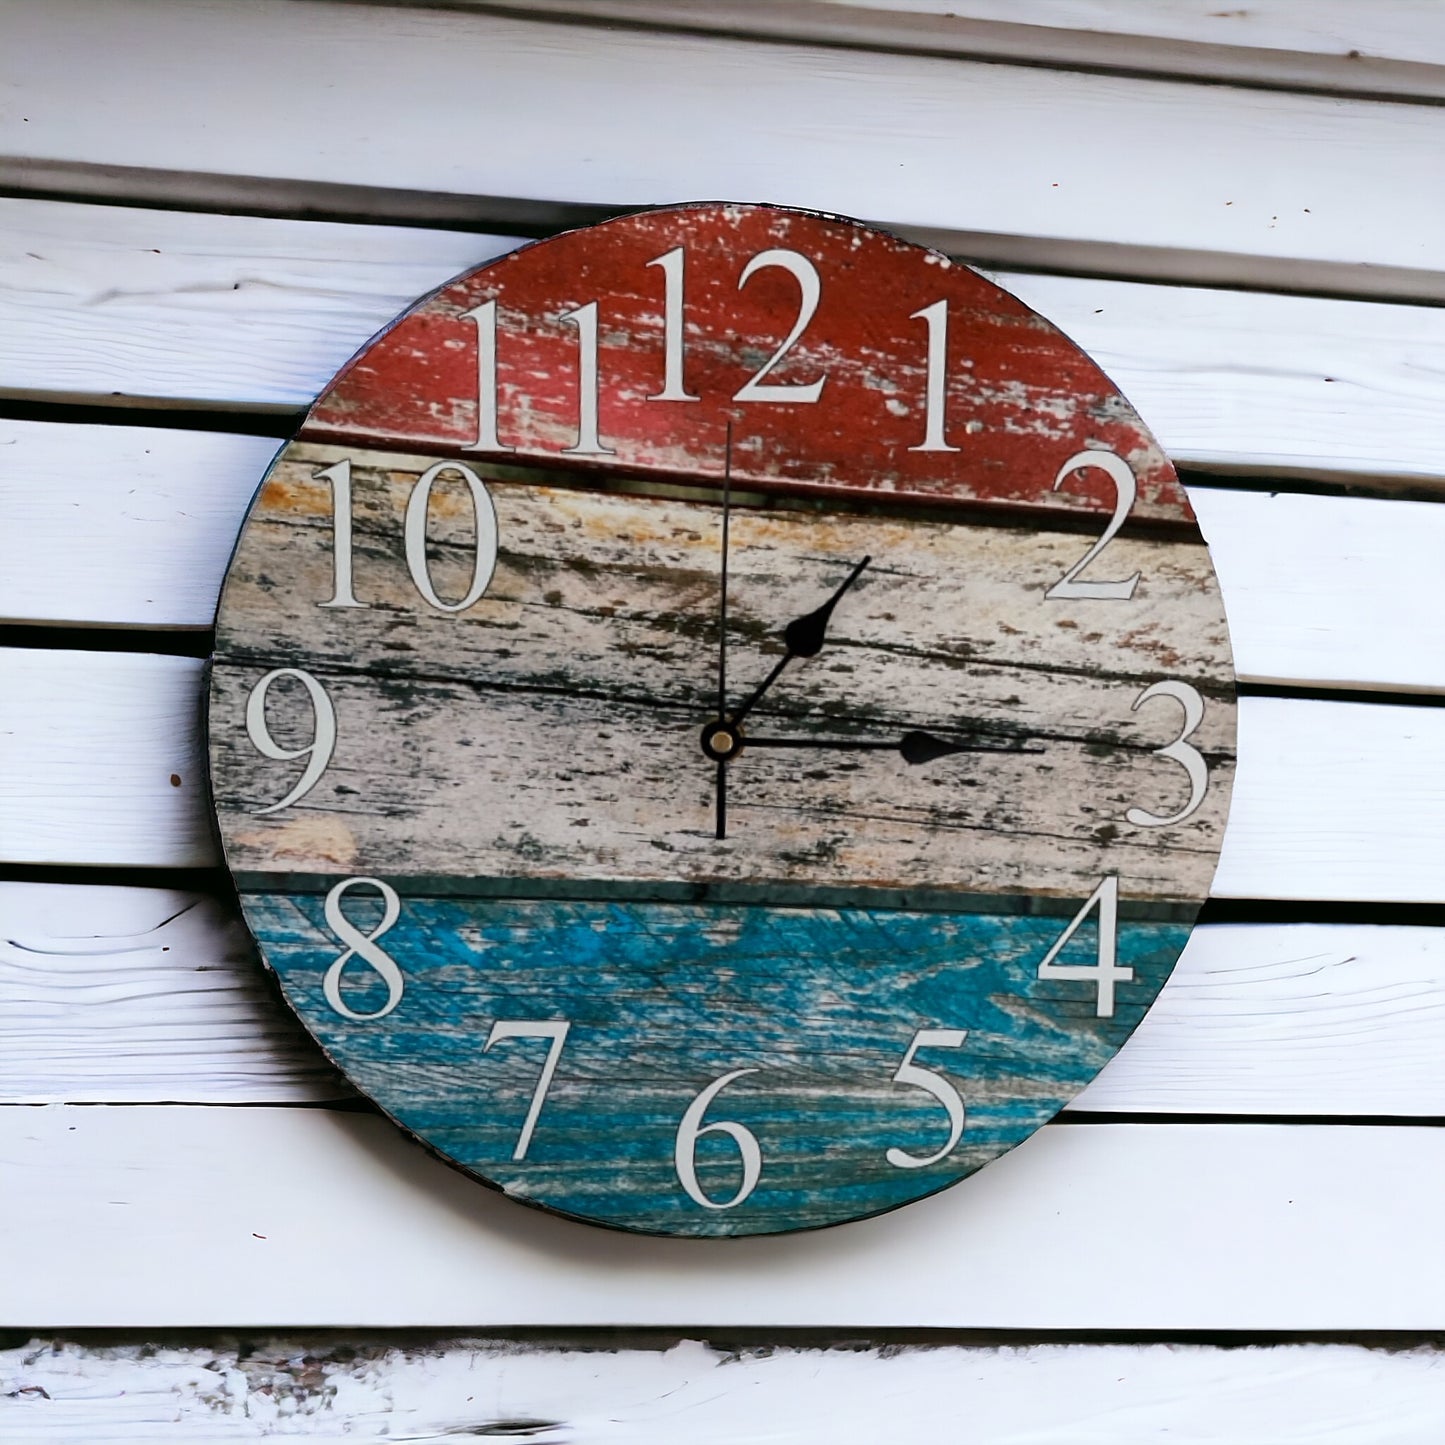 Clock Wall Rustic Red White Blue Timber Aussie Made - The Renmy Store Homewares & Gifts 